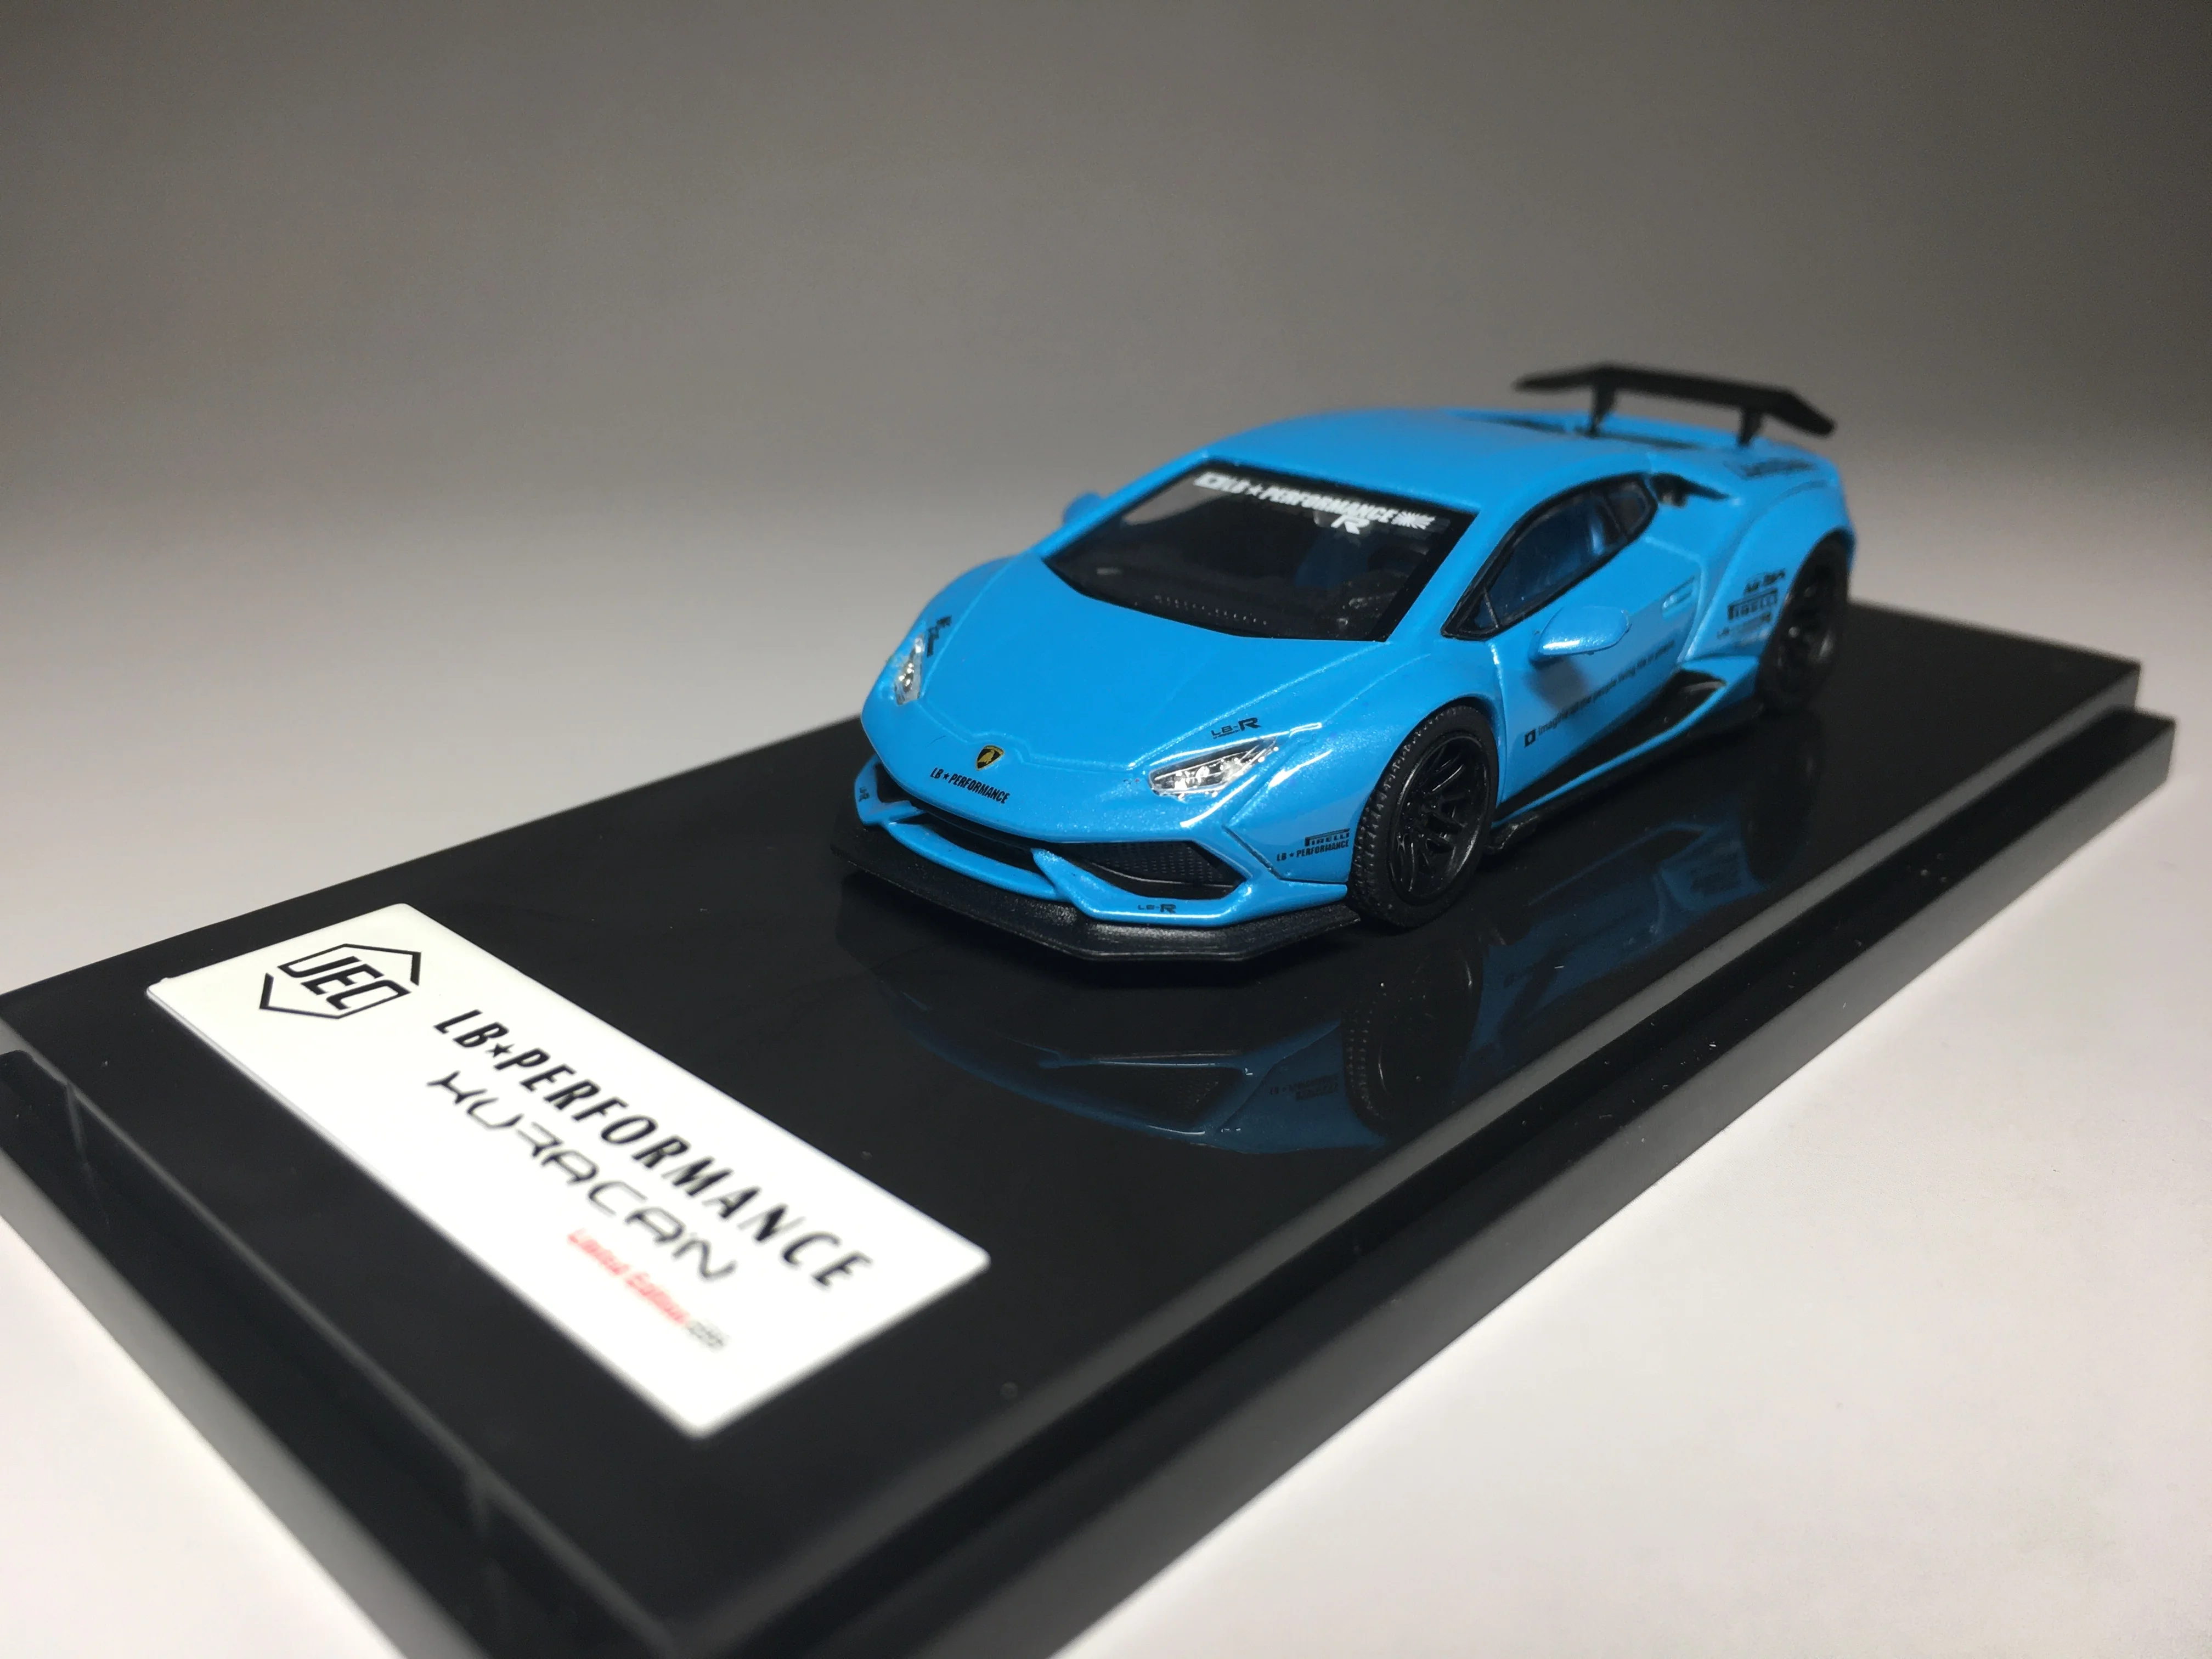 

JEC 1/64 Huracan Liberty Walk LBWK DieCast Model Car Collection Limited